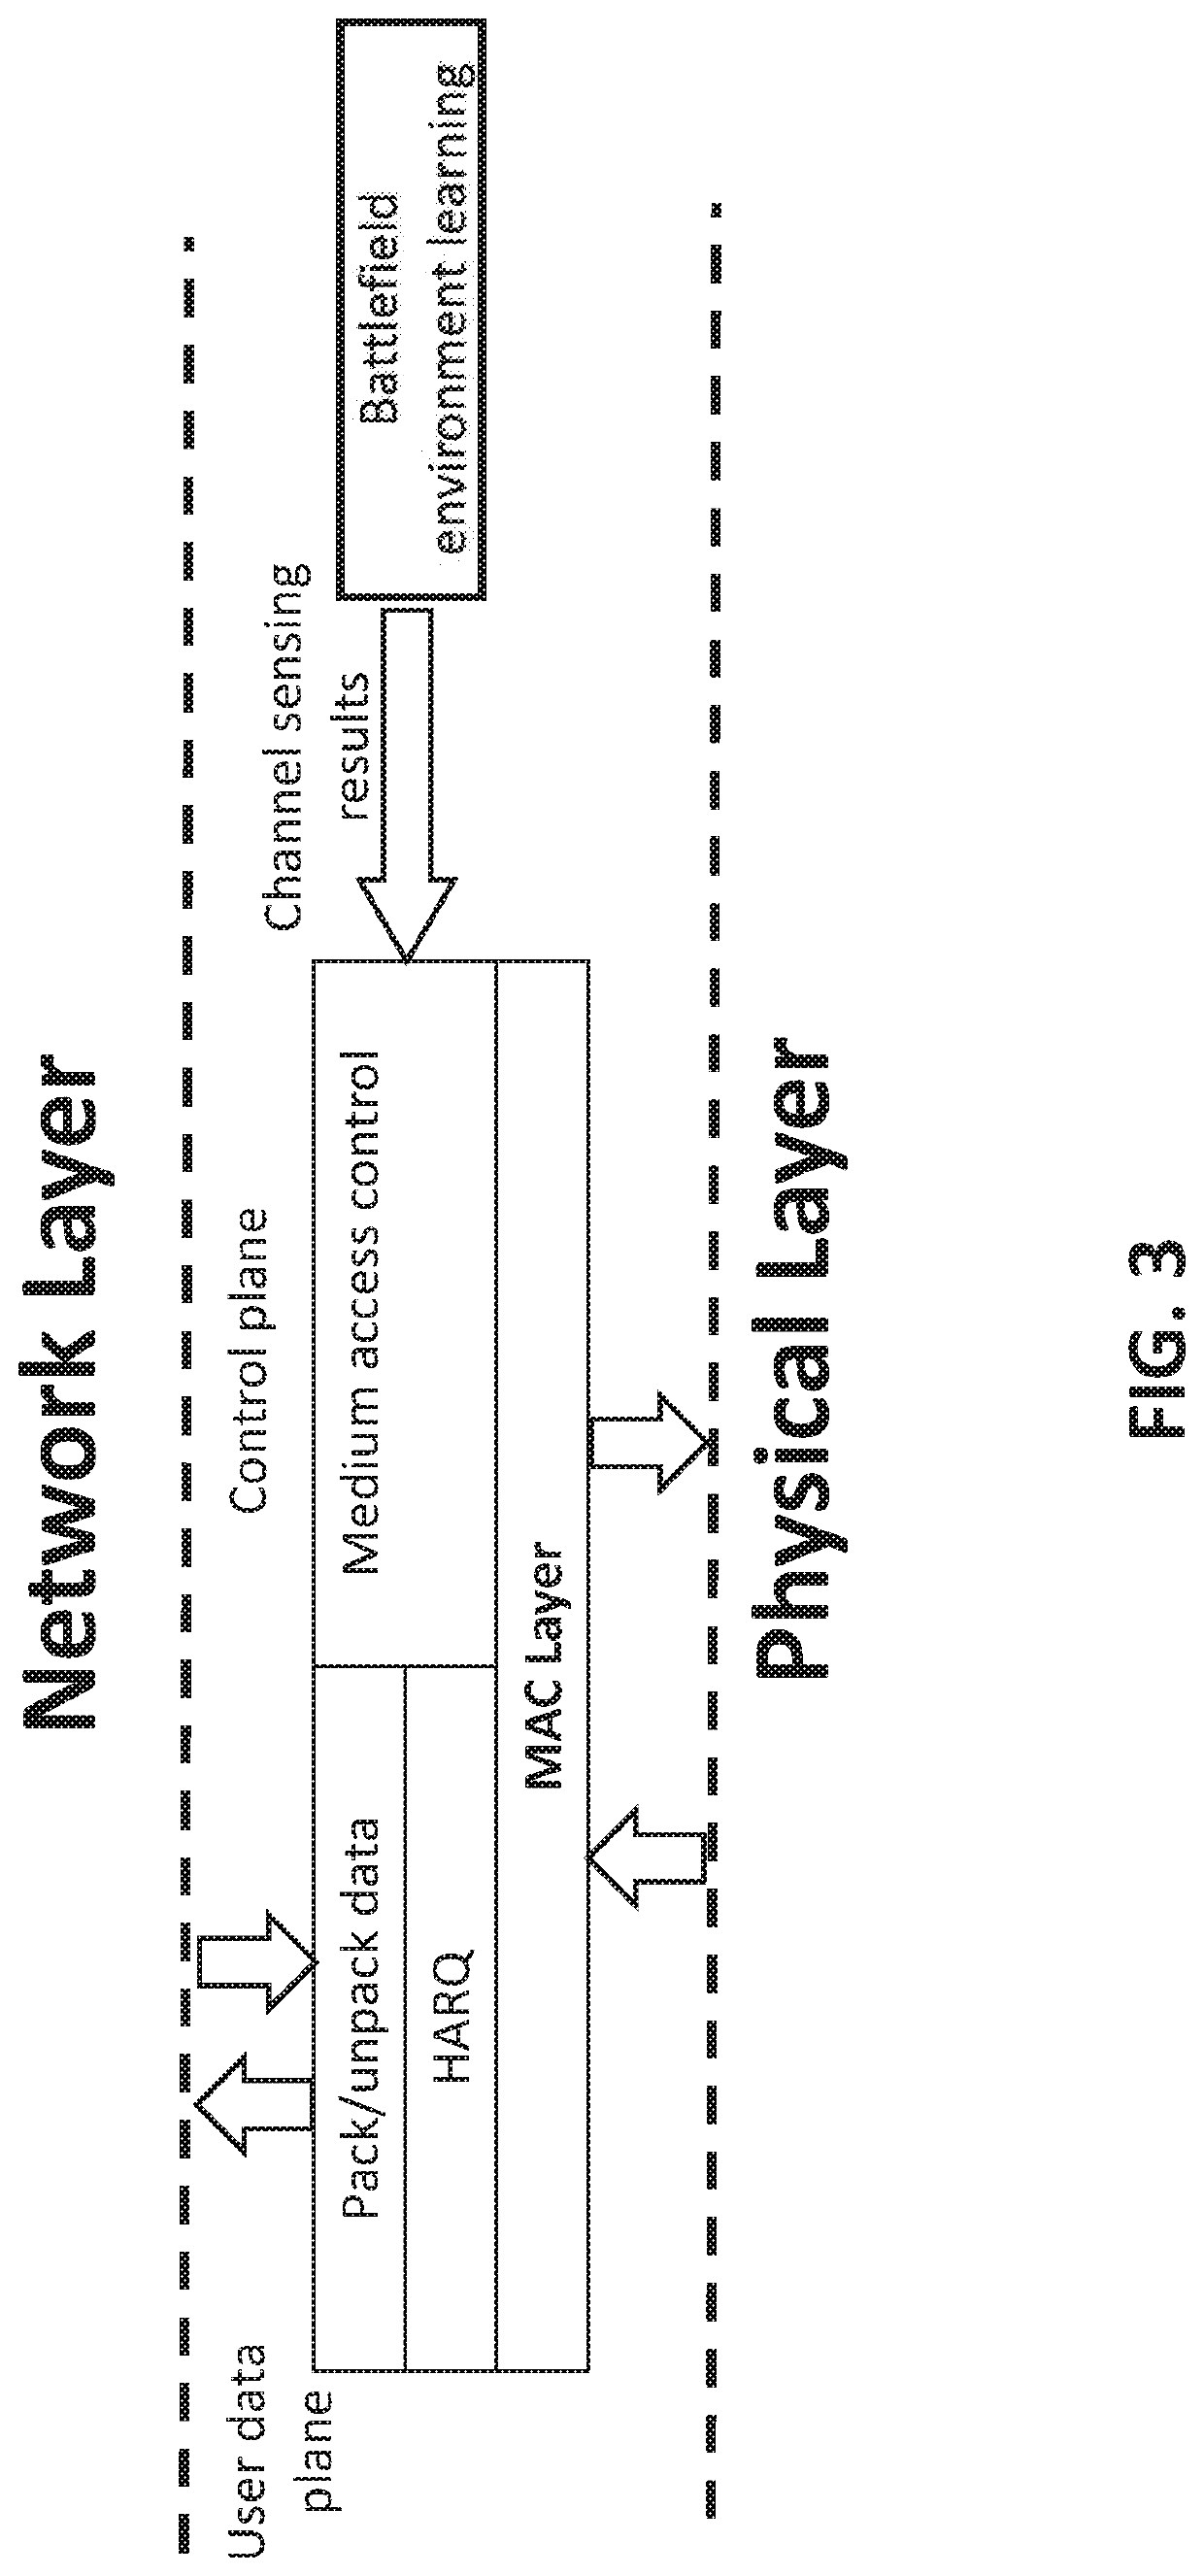 Method and system for energy efficient wireless communications